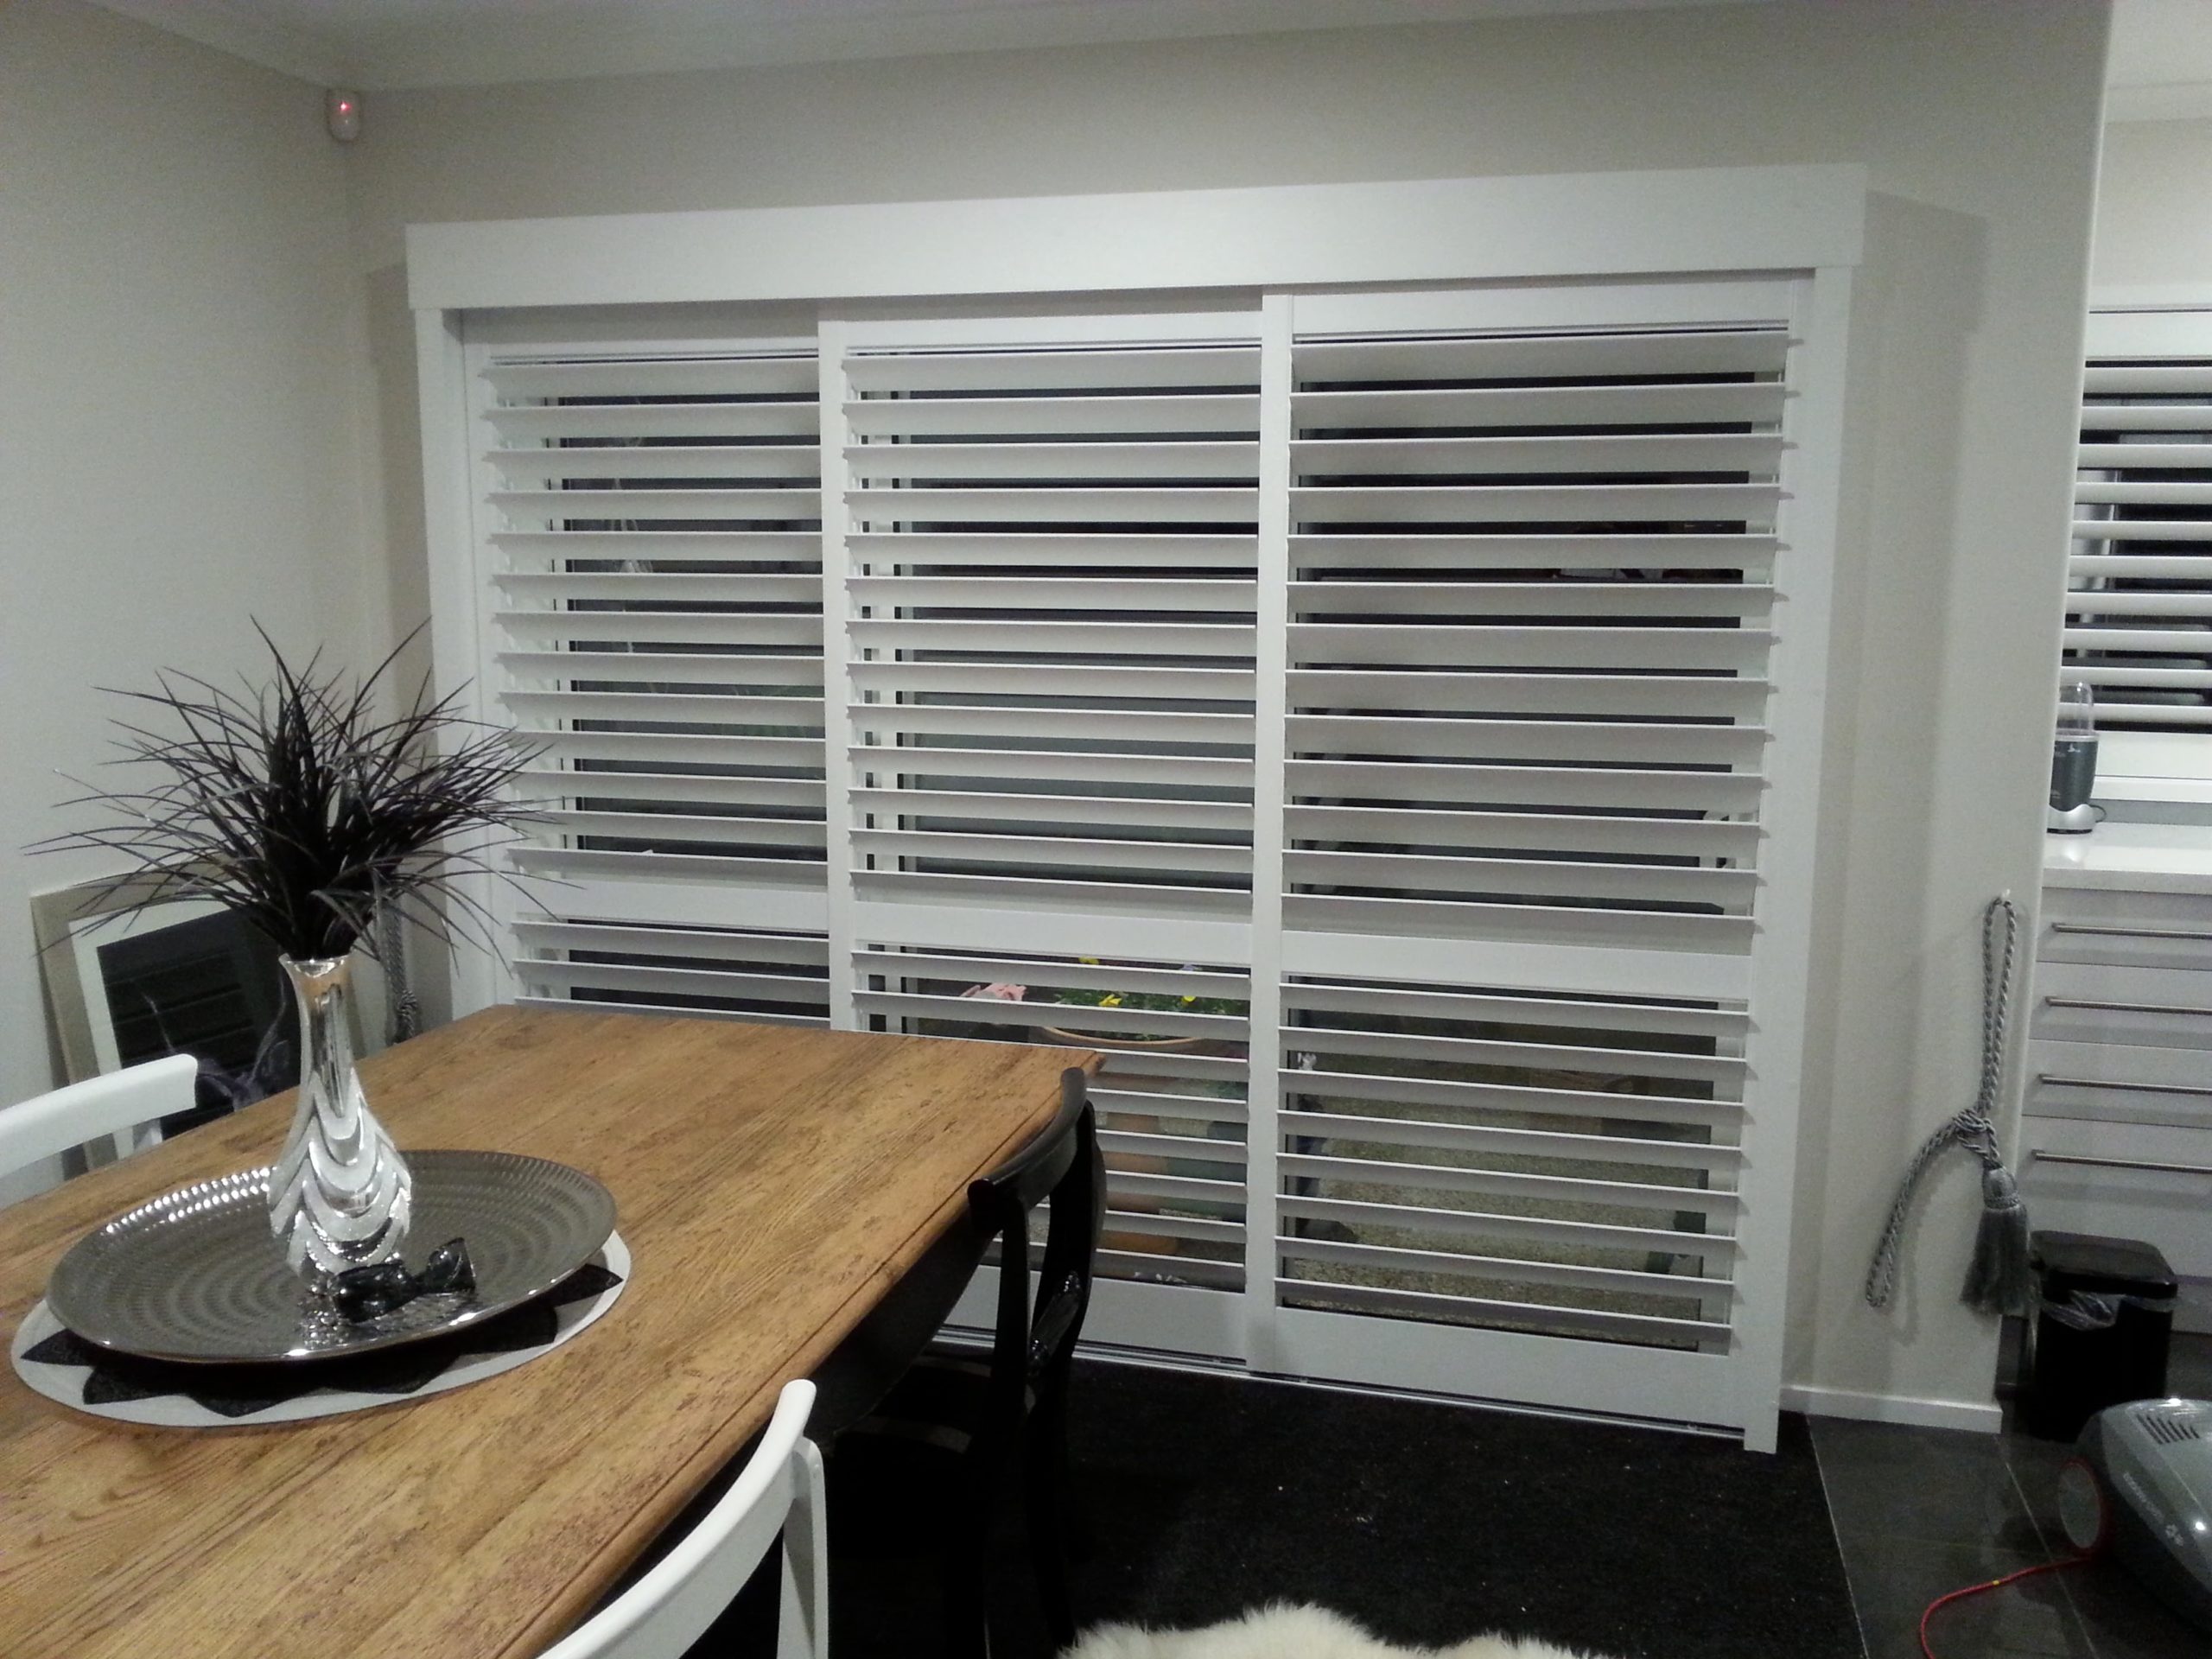 Why Plantation Shutters For Decorating Your Home?